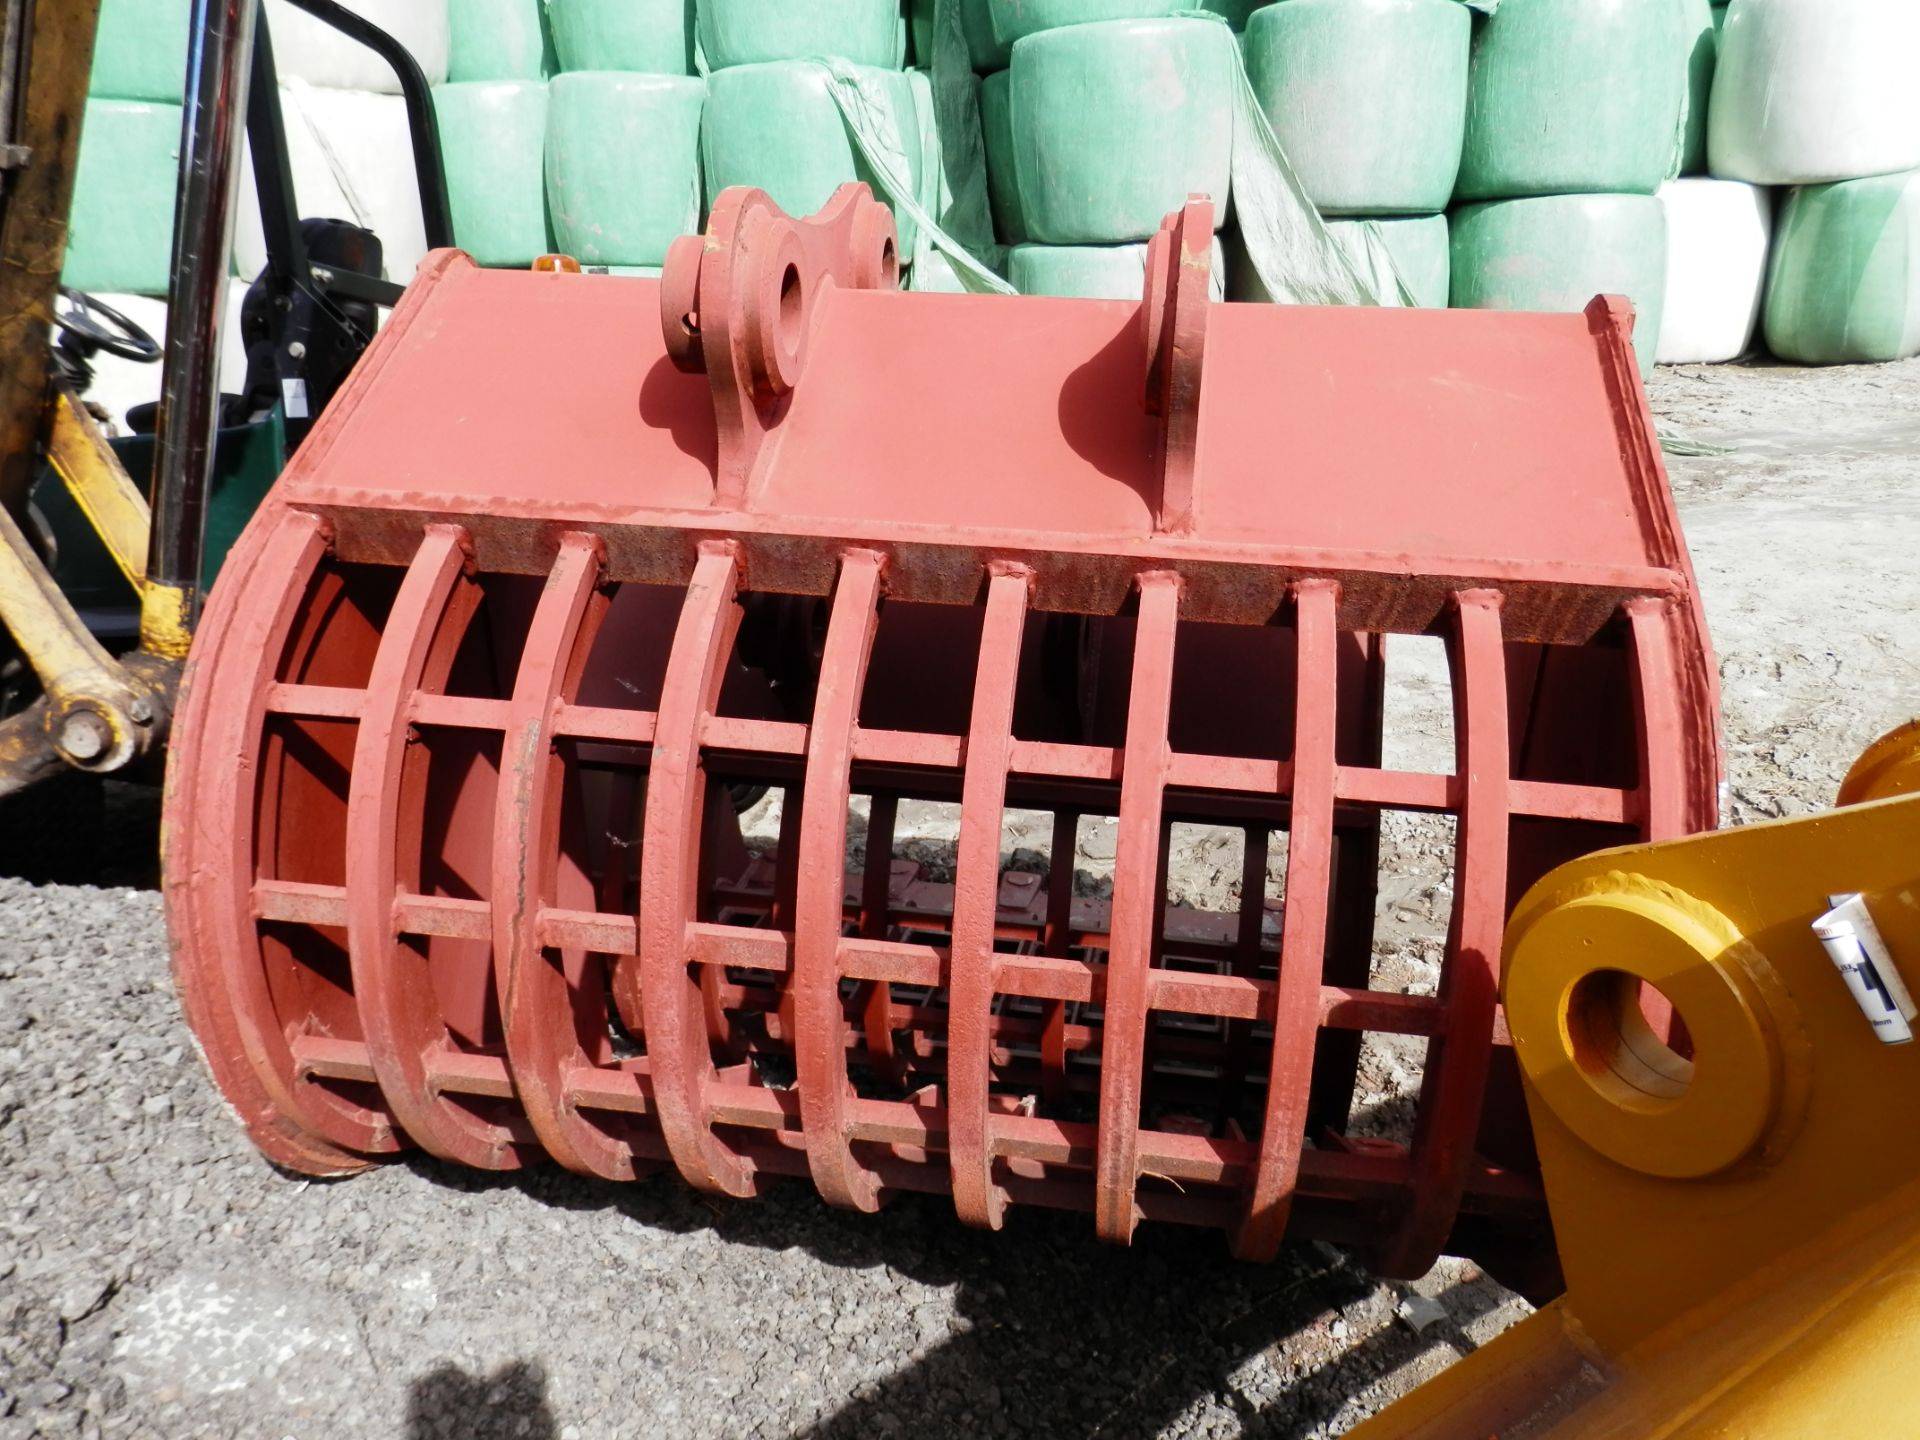 1 X RIDDLE BUCKET TO FIT 10T KOMATSU DIGGER. NEW & UNUSED. - Image 2 of 3